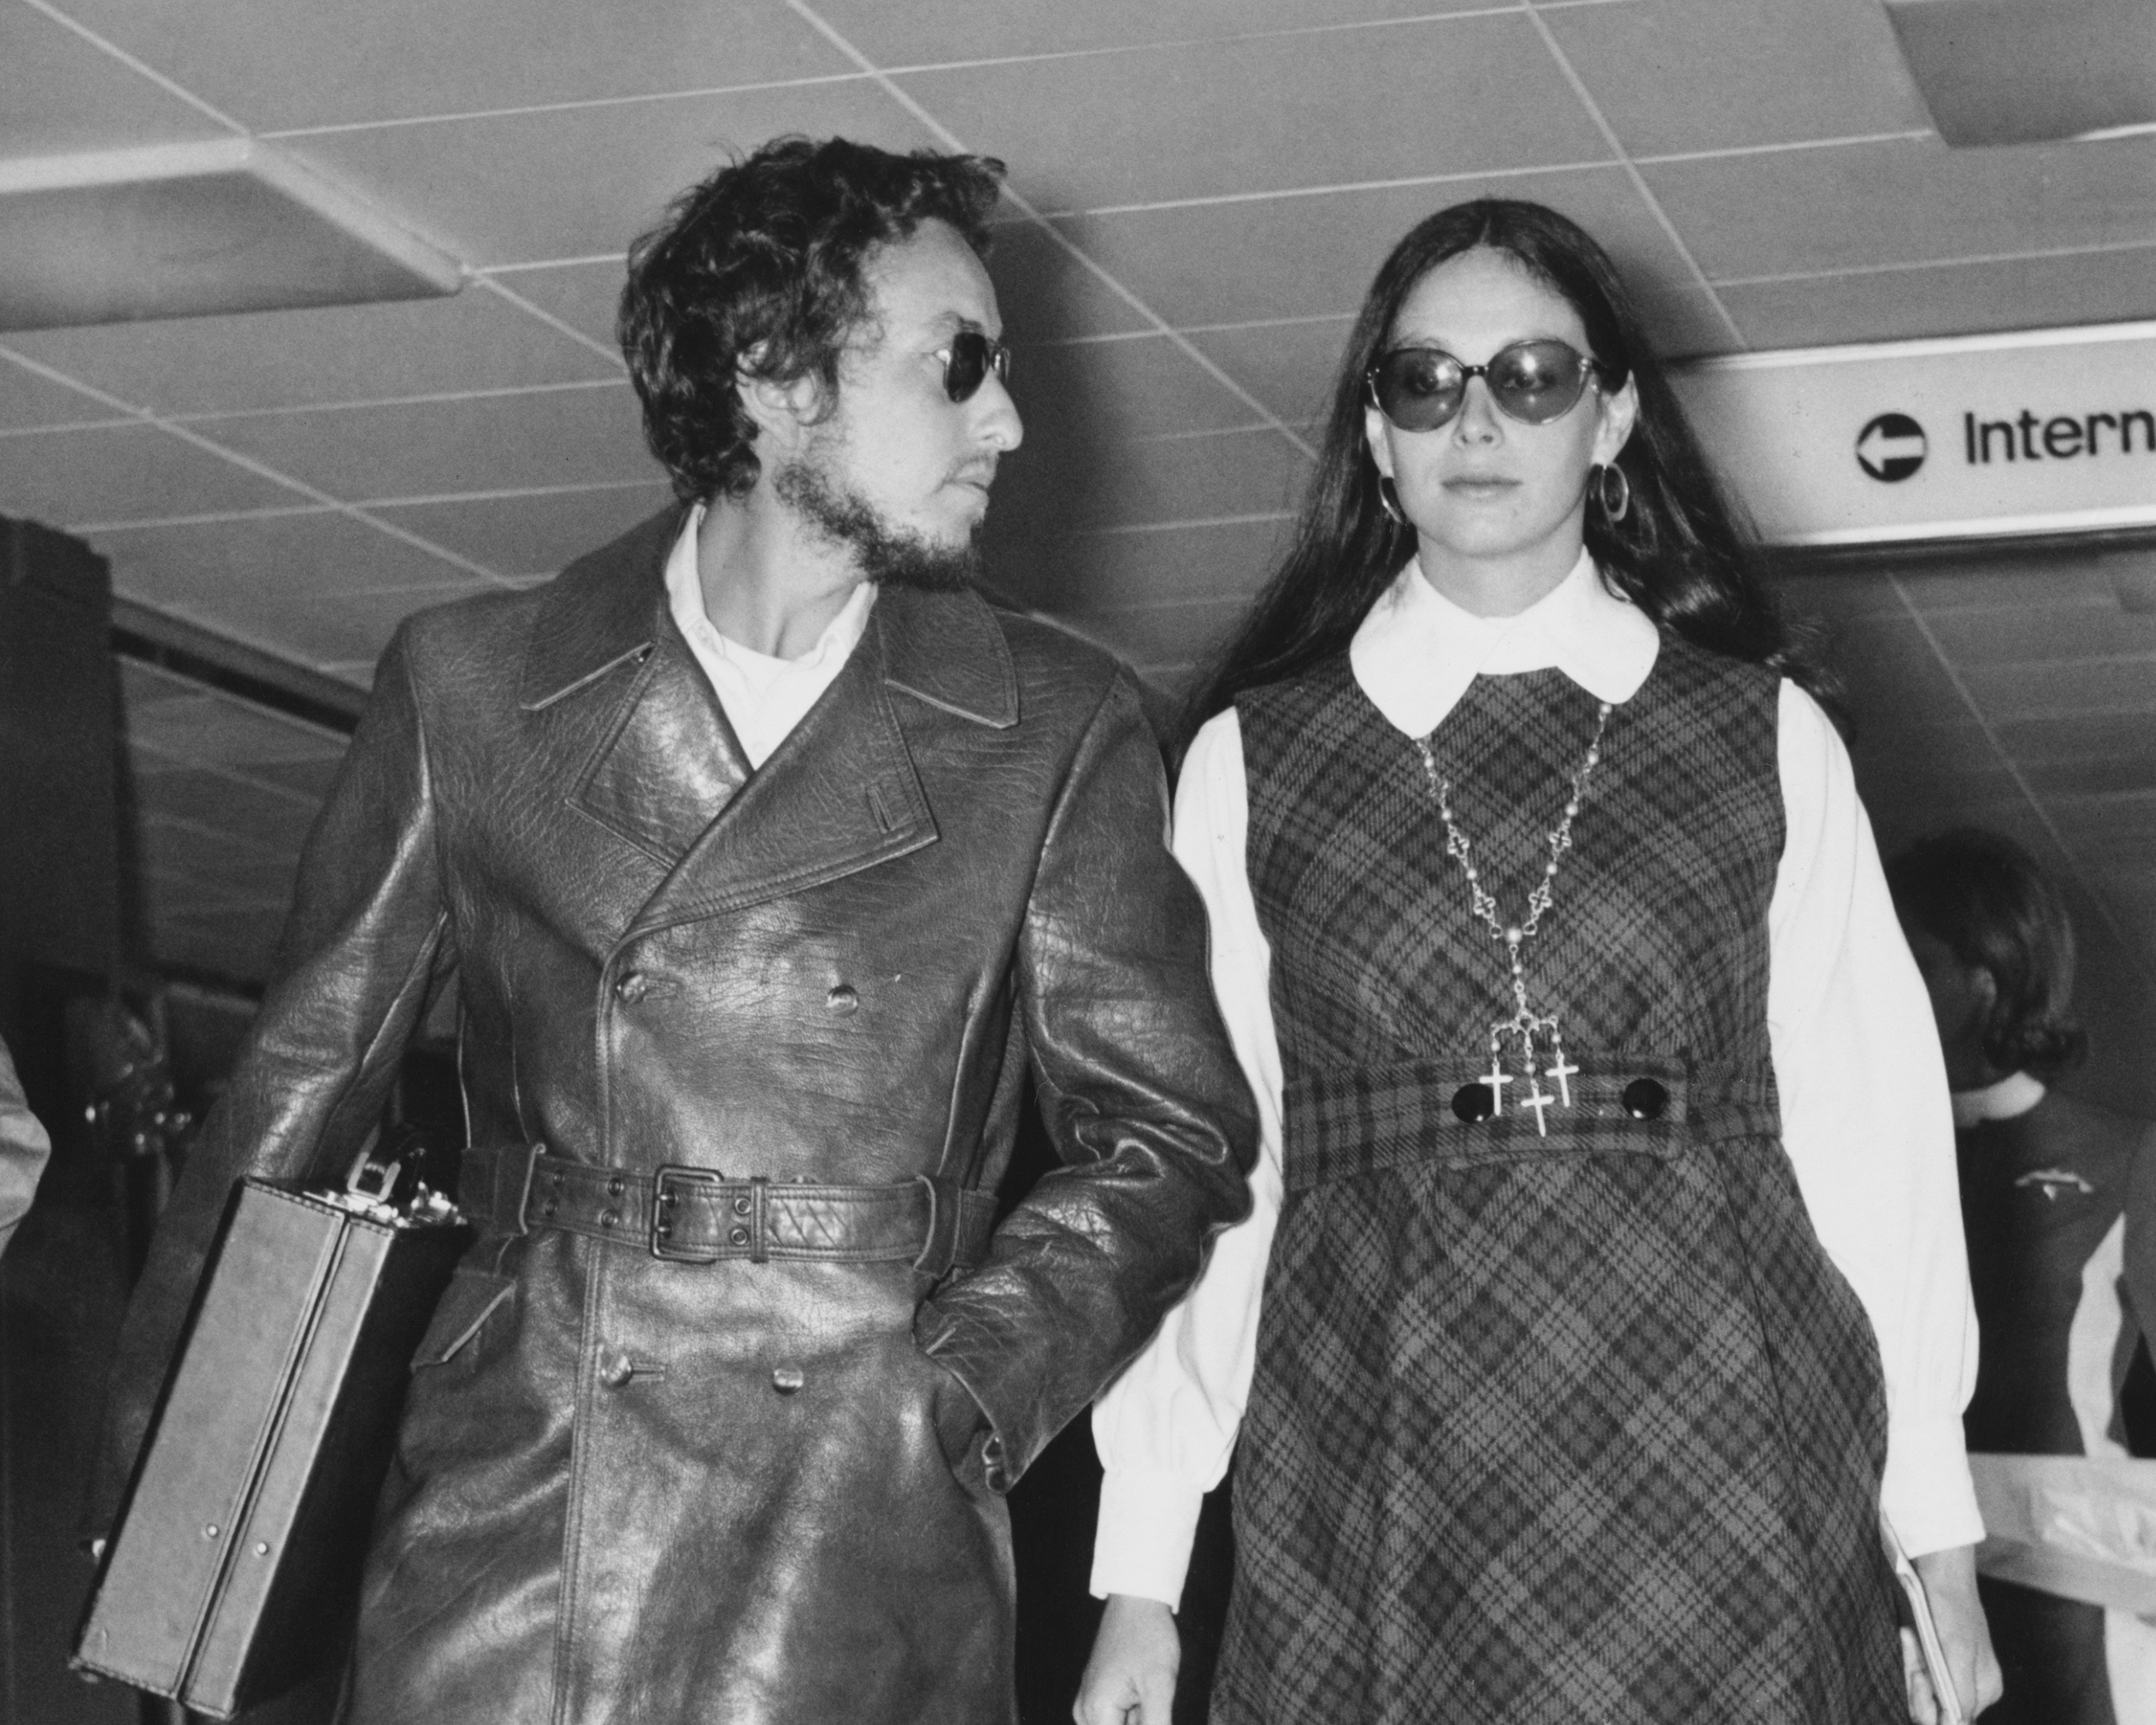 A black and white picture of Bob Dylan and Sara Dylan walking through an airport wearing sunglasses.